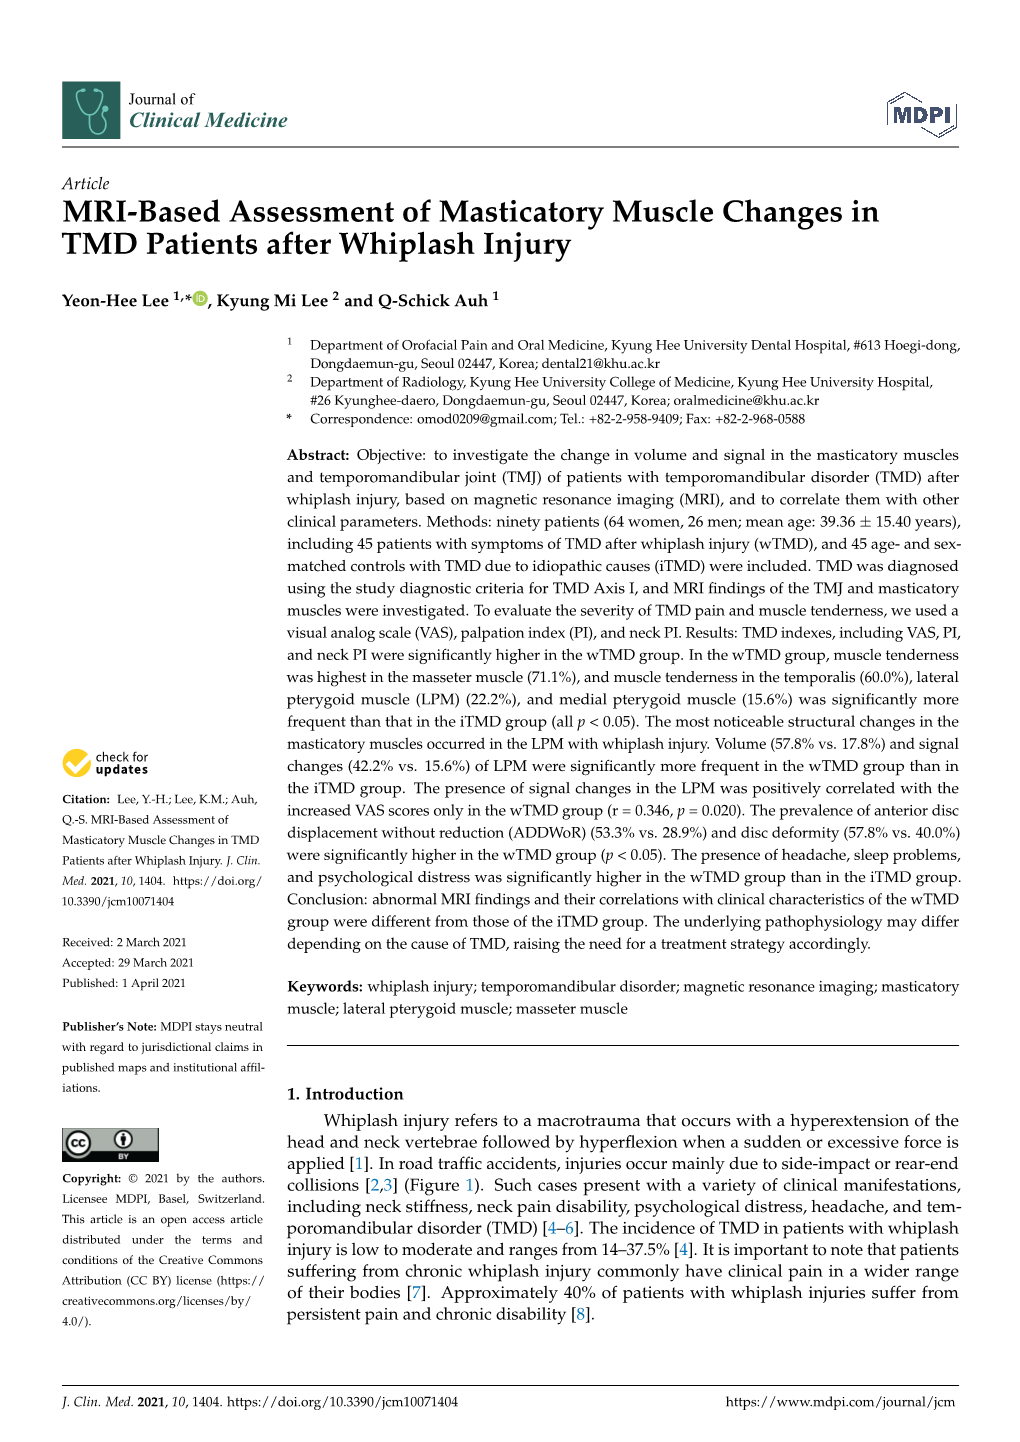 MRI-Based Assessment of Masticatory Muscle Changes in TMD Patients After Whiplash Injury